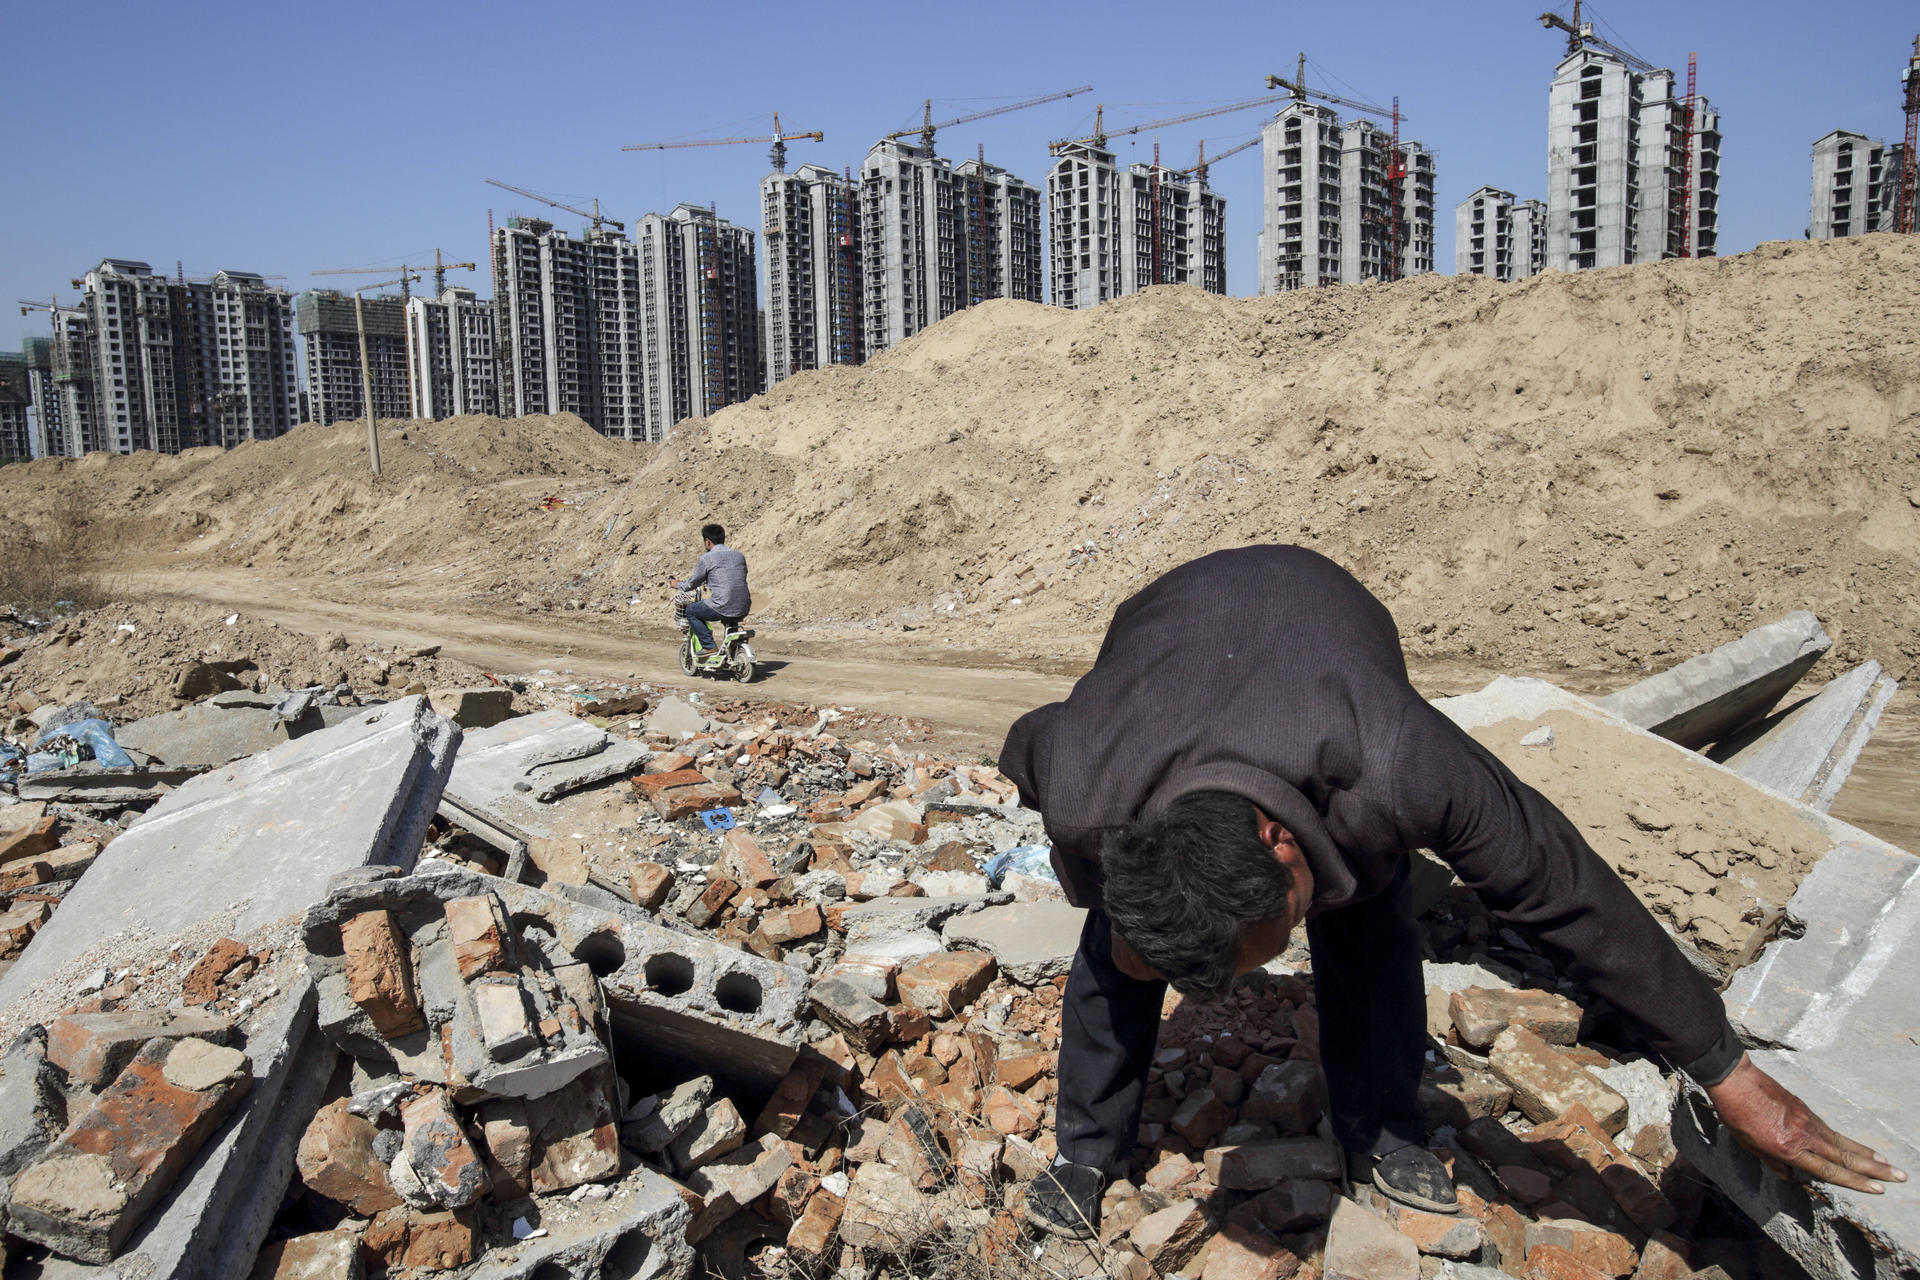 A 2013 image shows Li Rui scavenging for scrap metal where his village once was, in Liaocheng, Shandong province. Li was a farmer until six years ago, when the local government announced it would raze his village and turn farmland into an urban development zone.